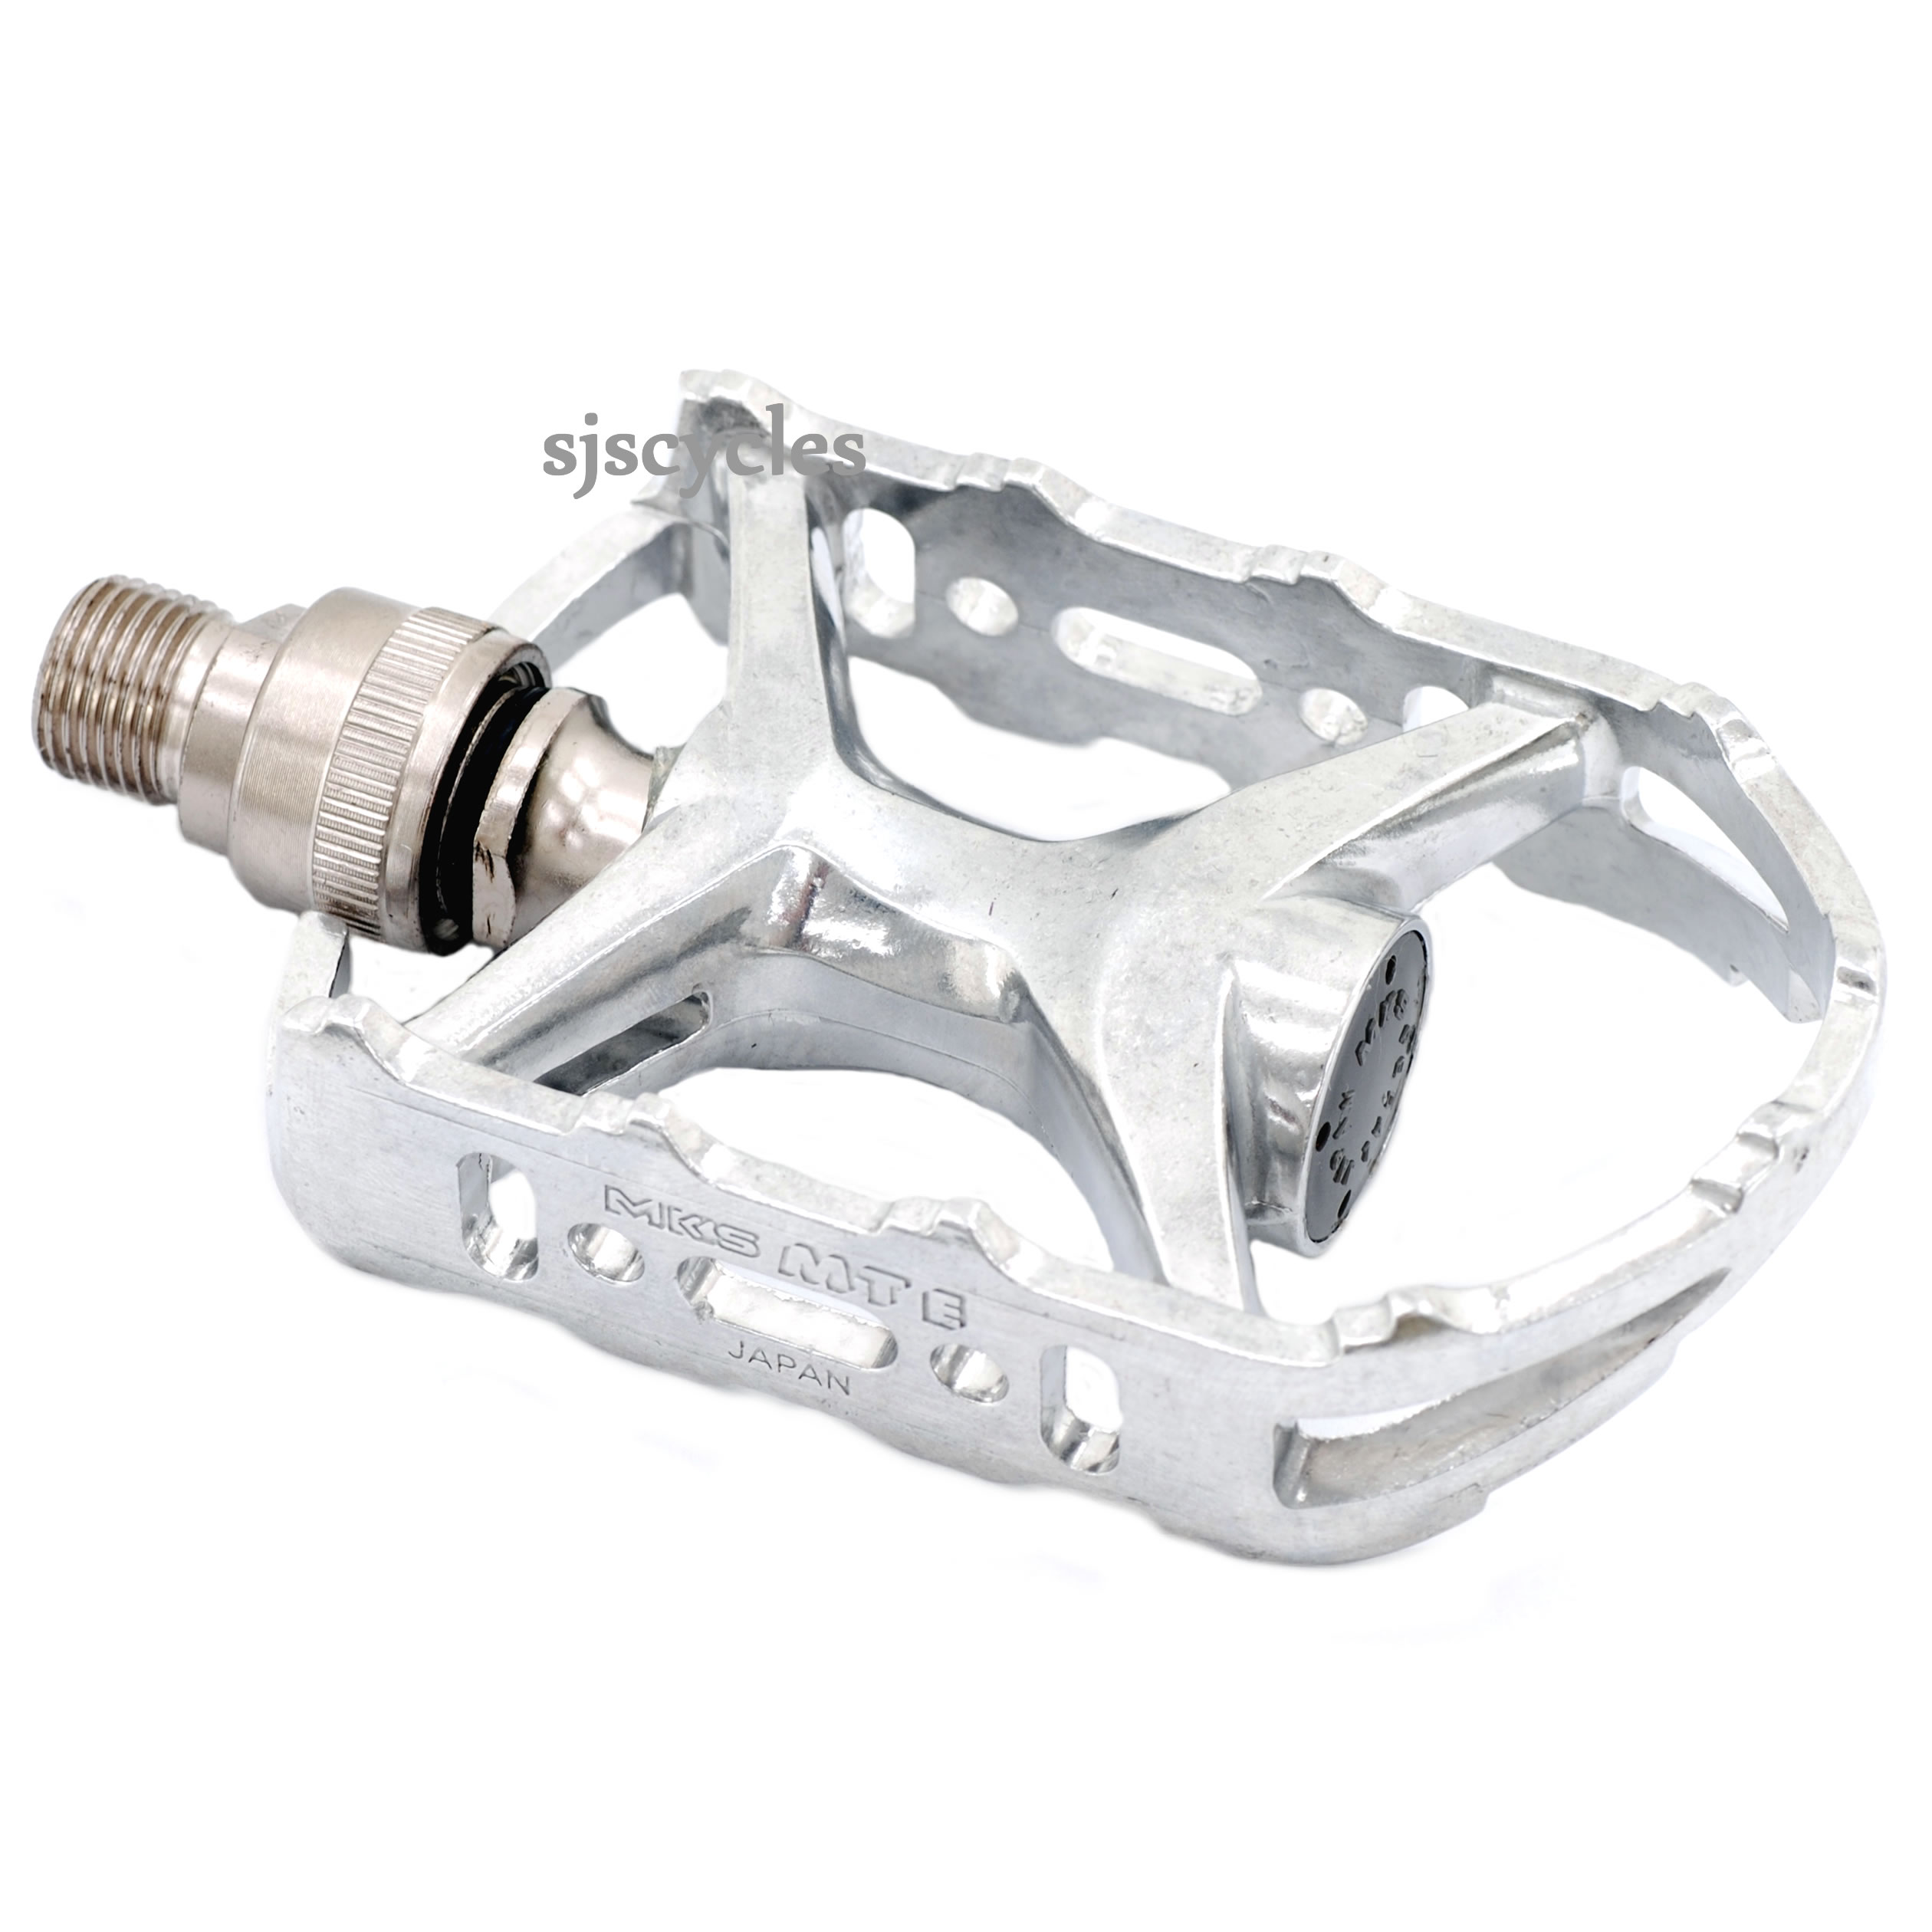 Details about   MKS MT Ezy Touring Pedal Divisible Aluminium 9/16 Silver or Black 